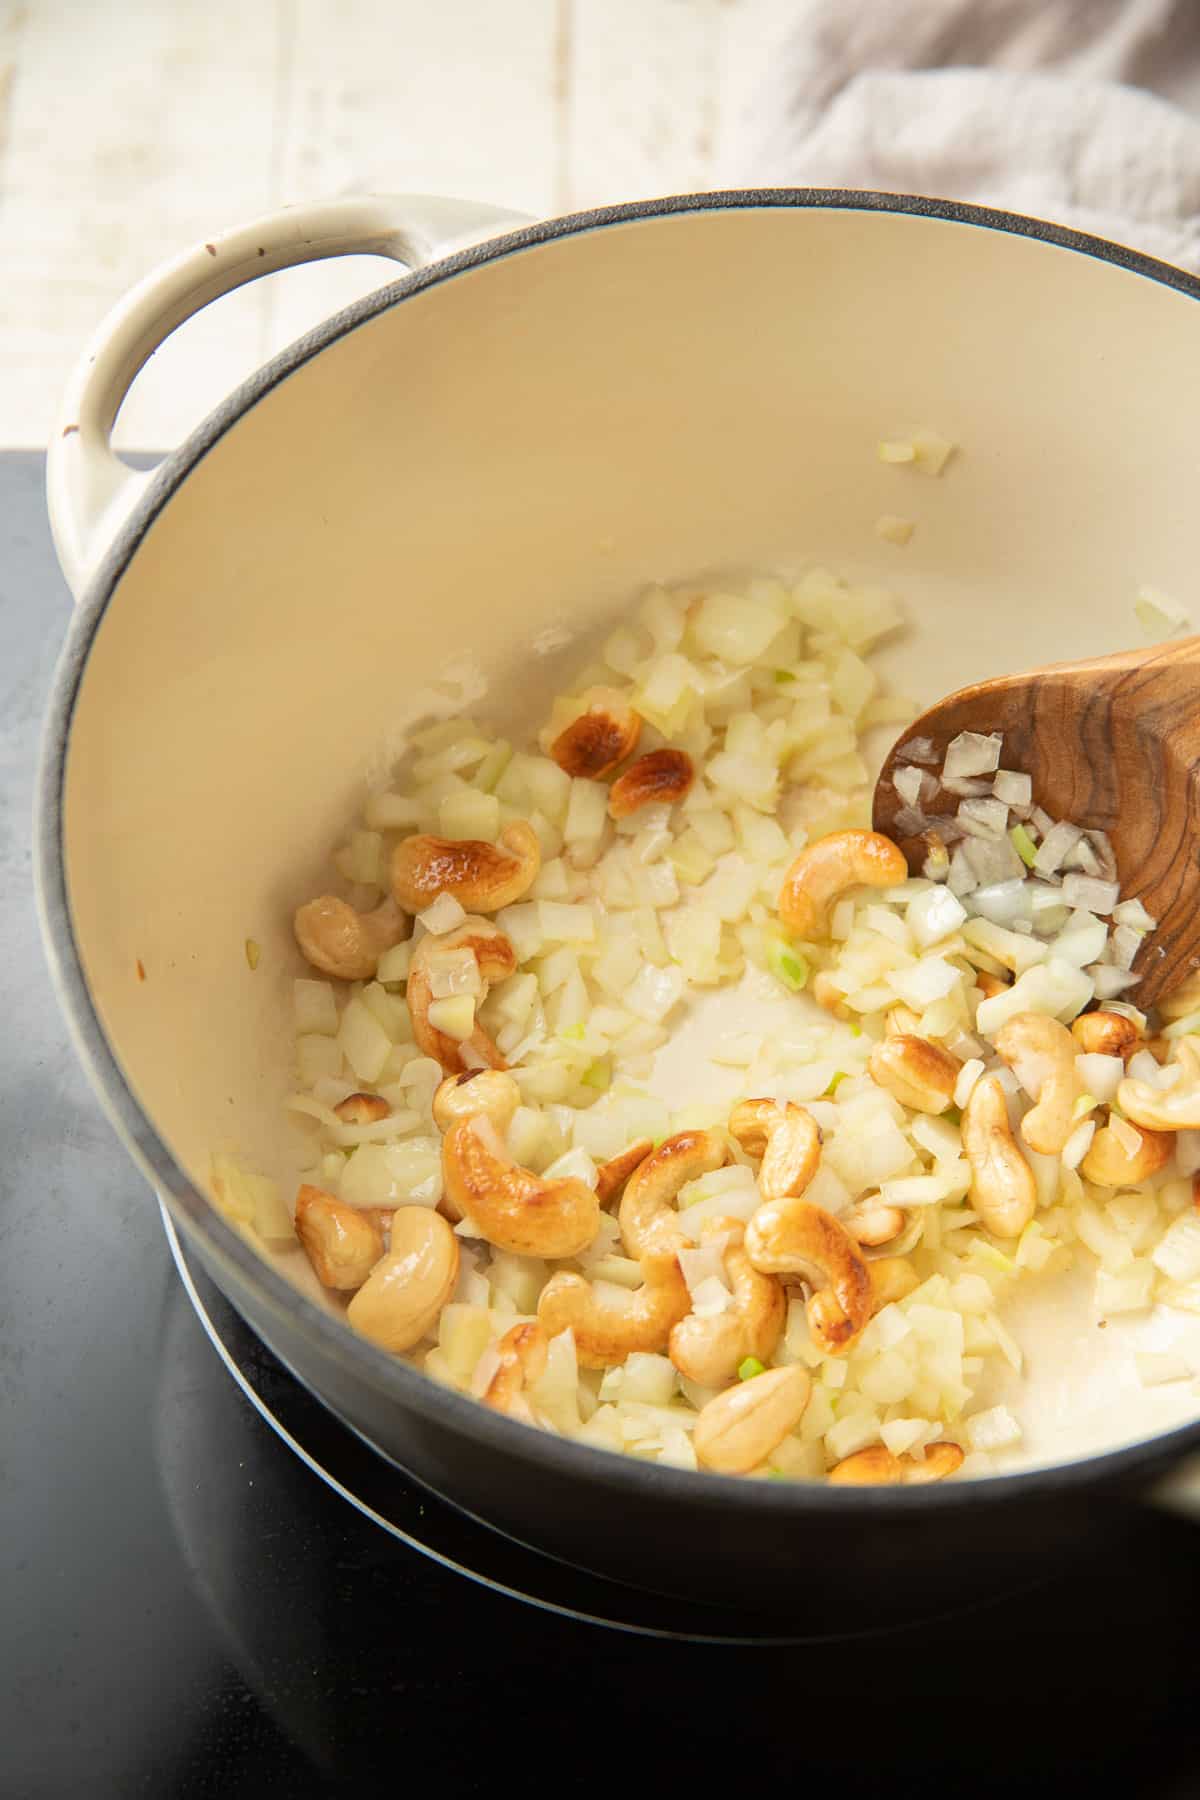 Diced onions and cashews cooking in a pot.